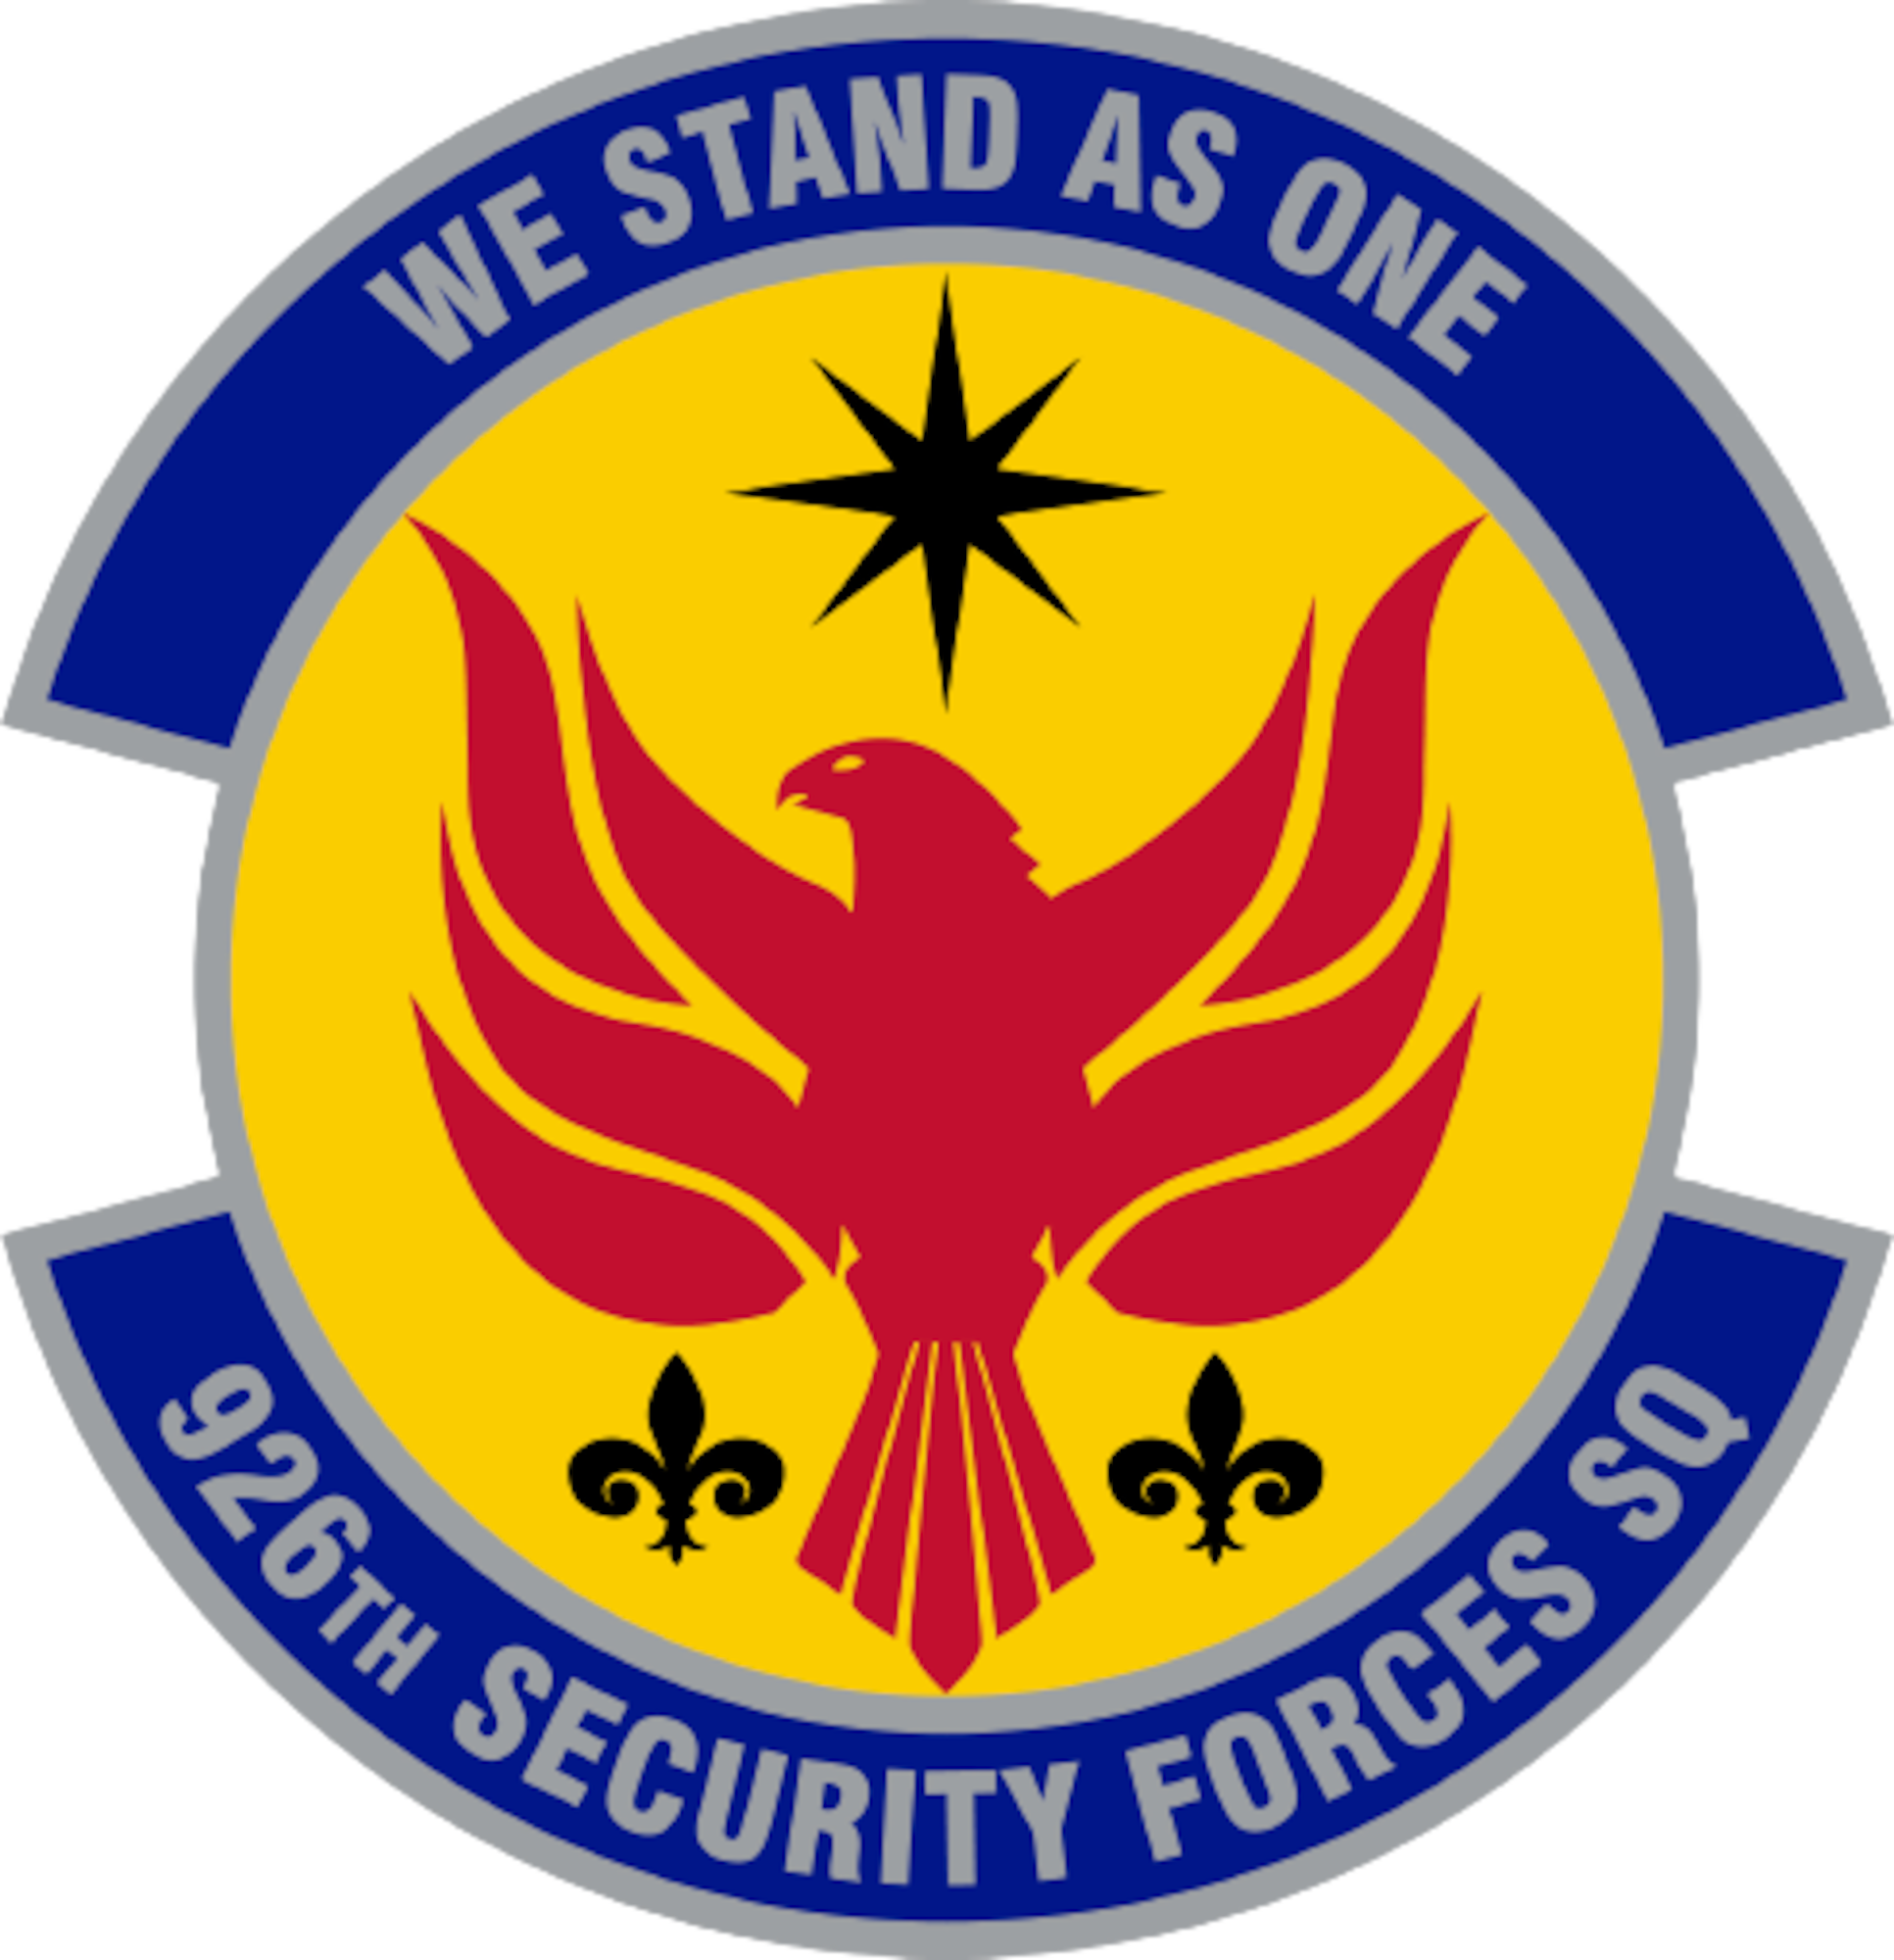 A multi-colored emblem reads "we stand as one 926th Security Forces Squadron"